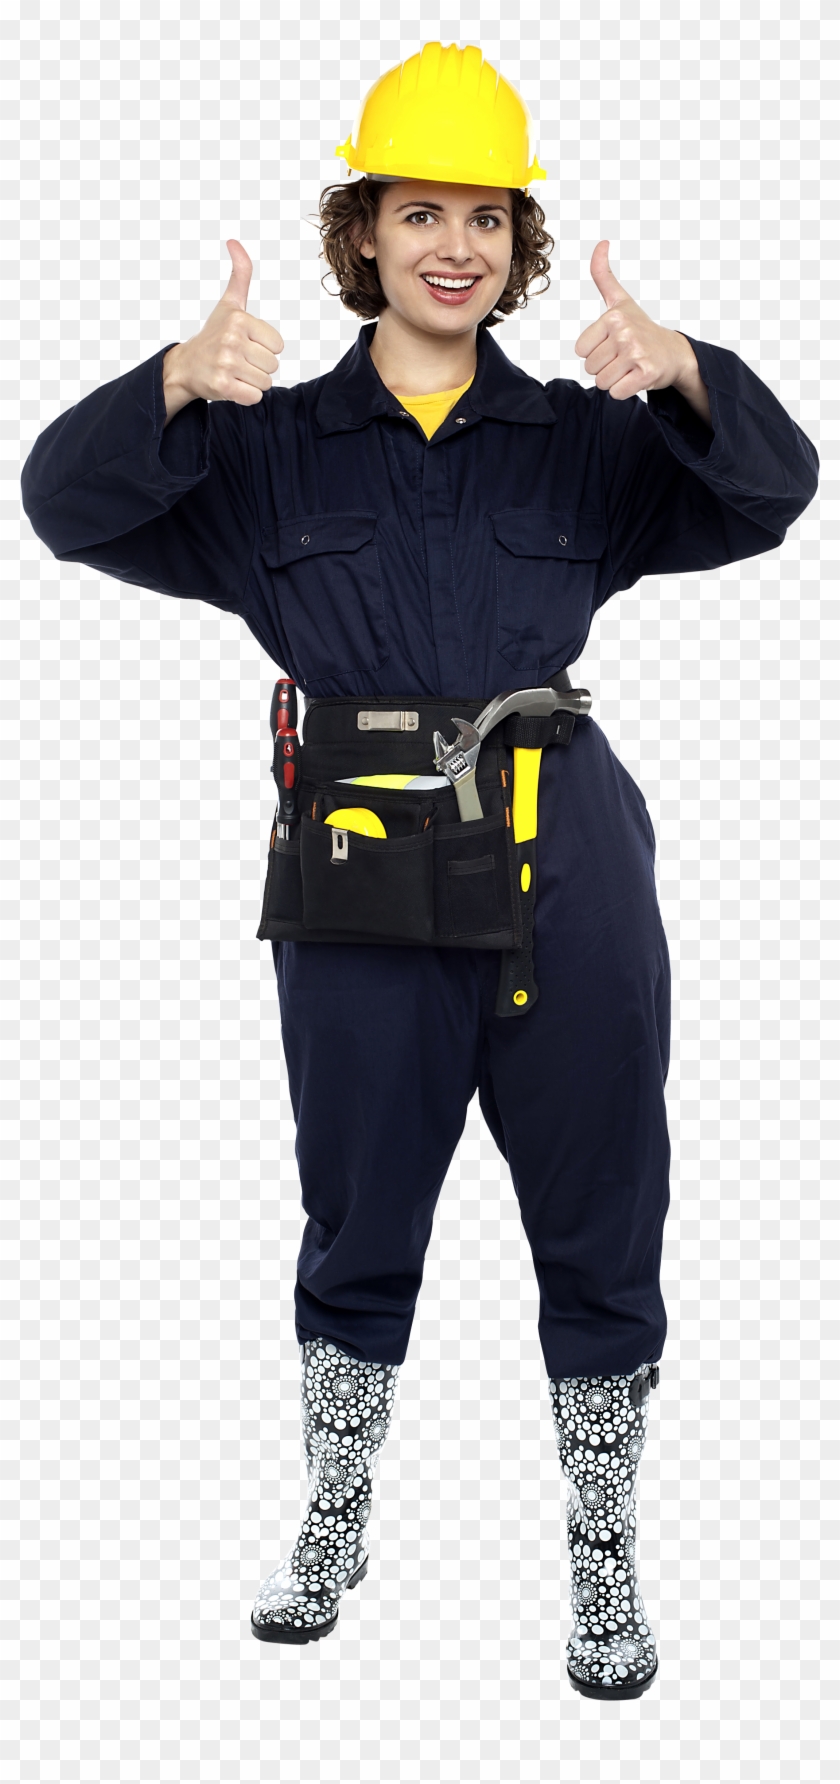 This High Quality Free Png Image Without Any Background - Construction Worker #396325